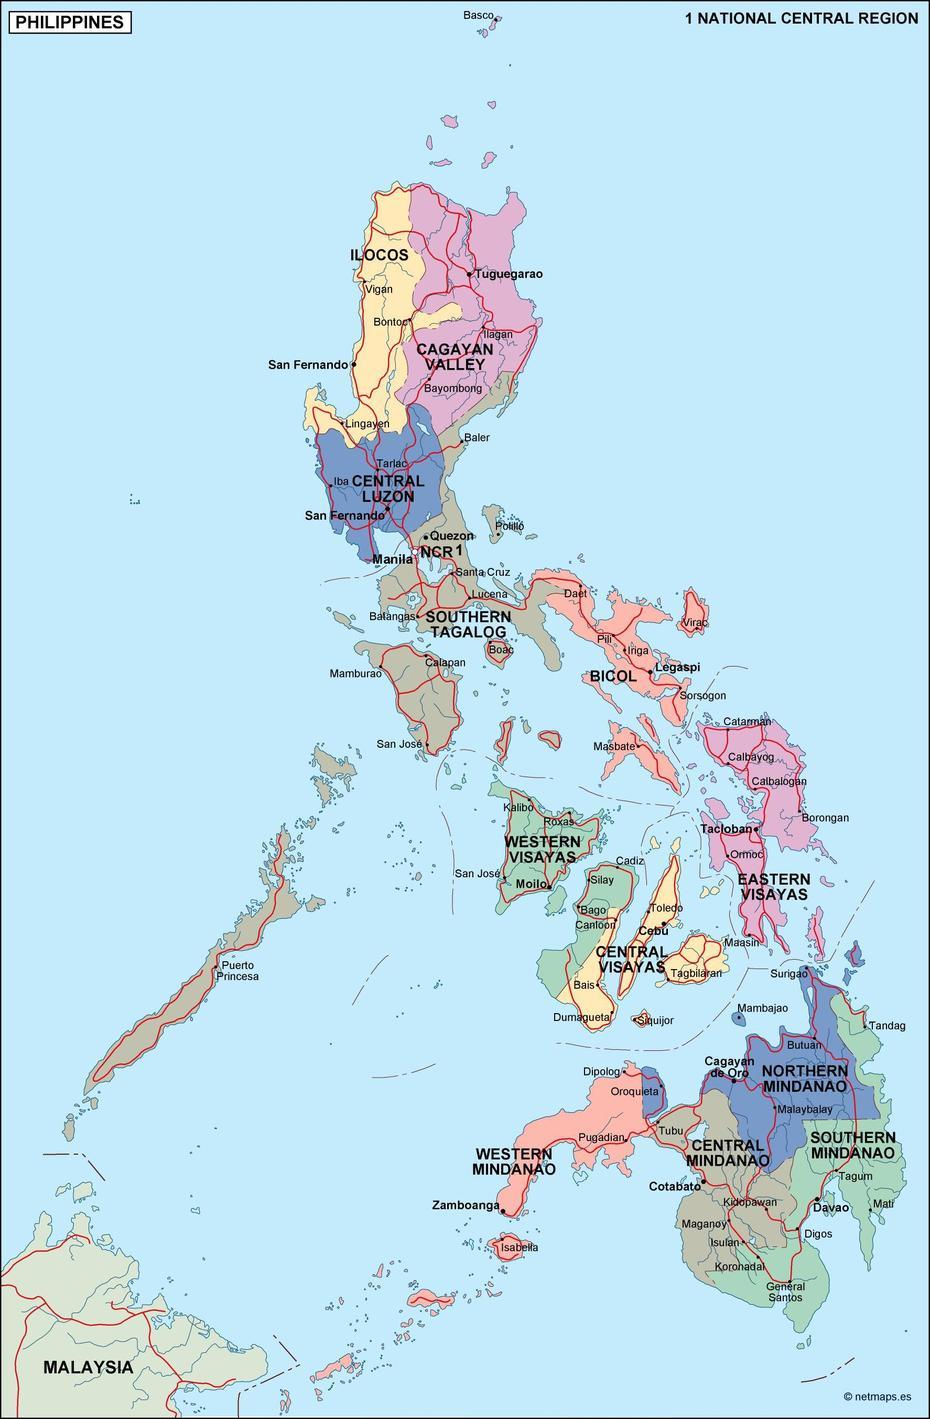 Philippines Political Map. Eps Illustrator Map | Vector World Maps, Lauaan, Philippines, Kalibo  Airport, Caticlan Philippines